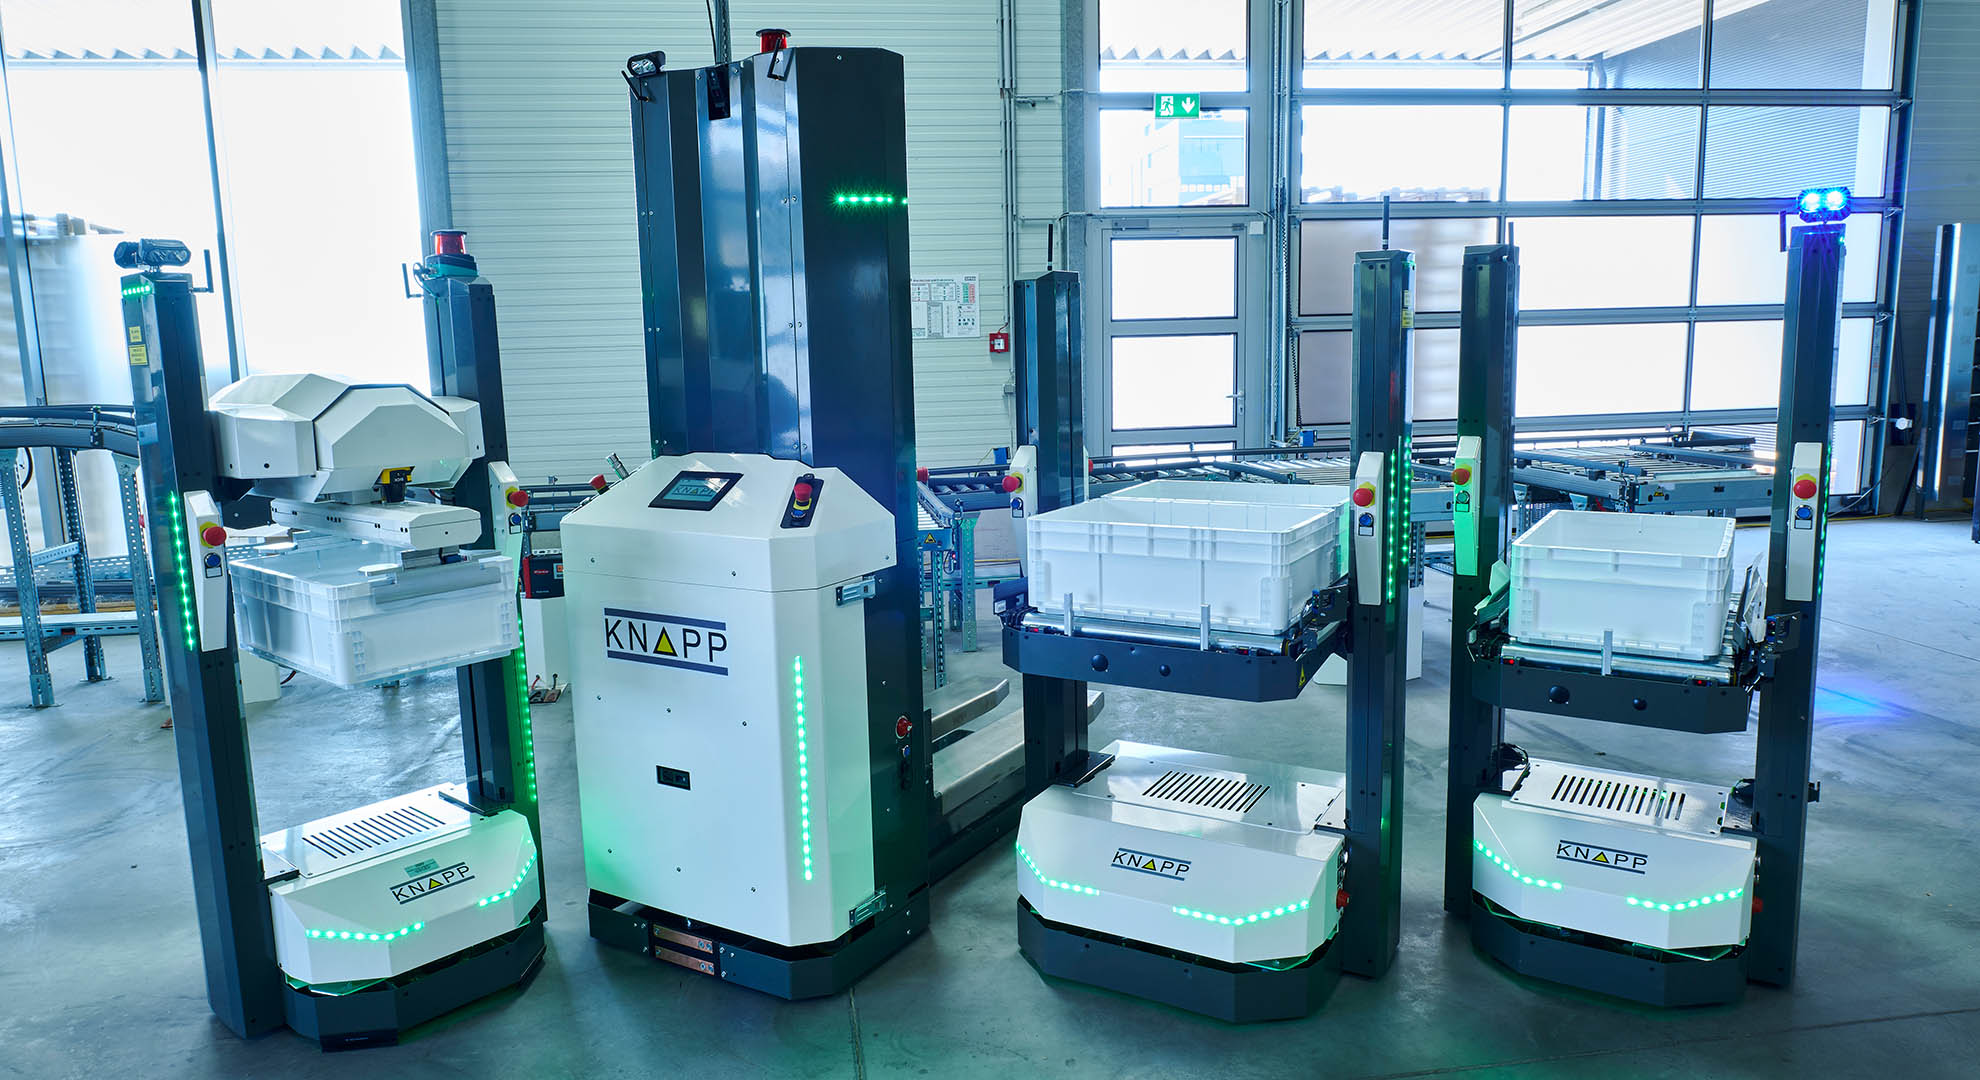 Automated guided vehicle systems handle the transport of supplies required at the work stations.